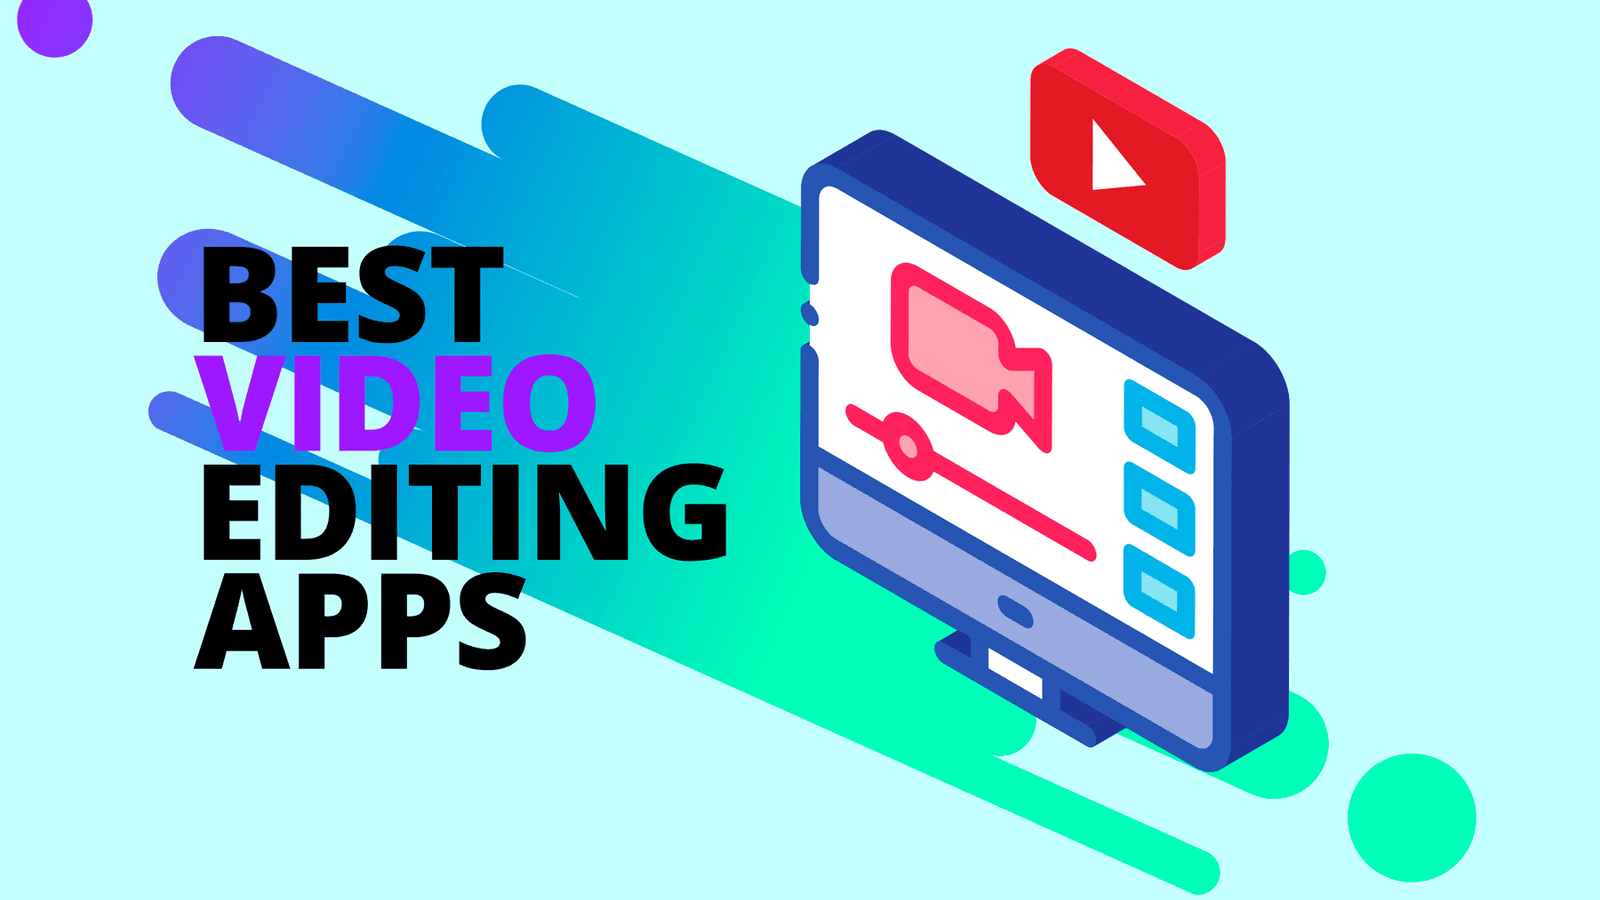 Best Video Editing Apps for YouTube